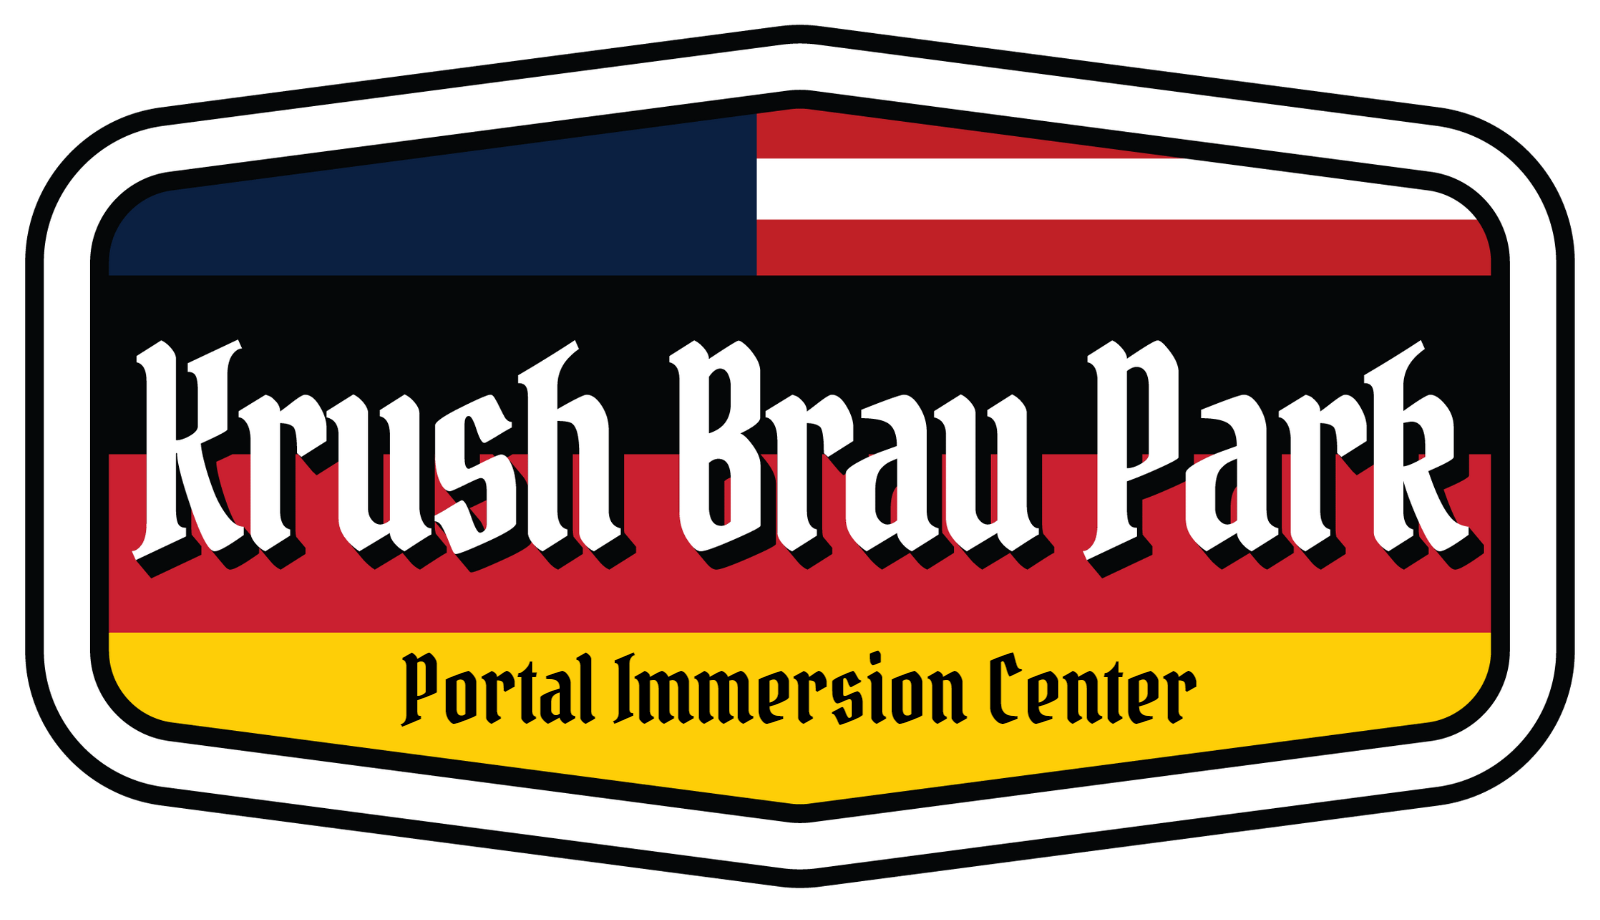 Krush Brau Park Portal Immersion Center is Now Open Daily